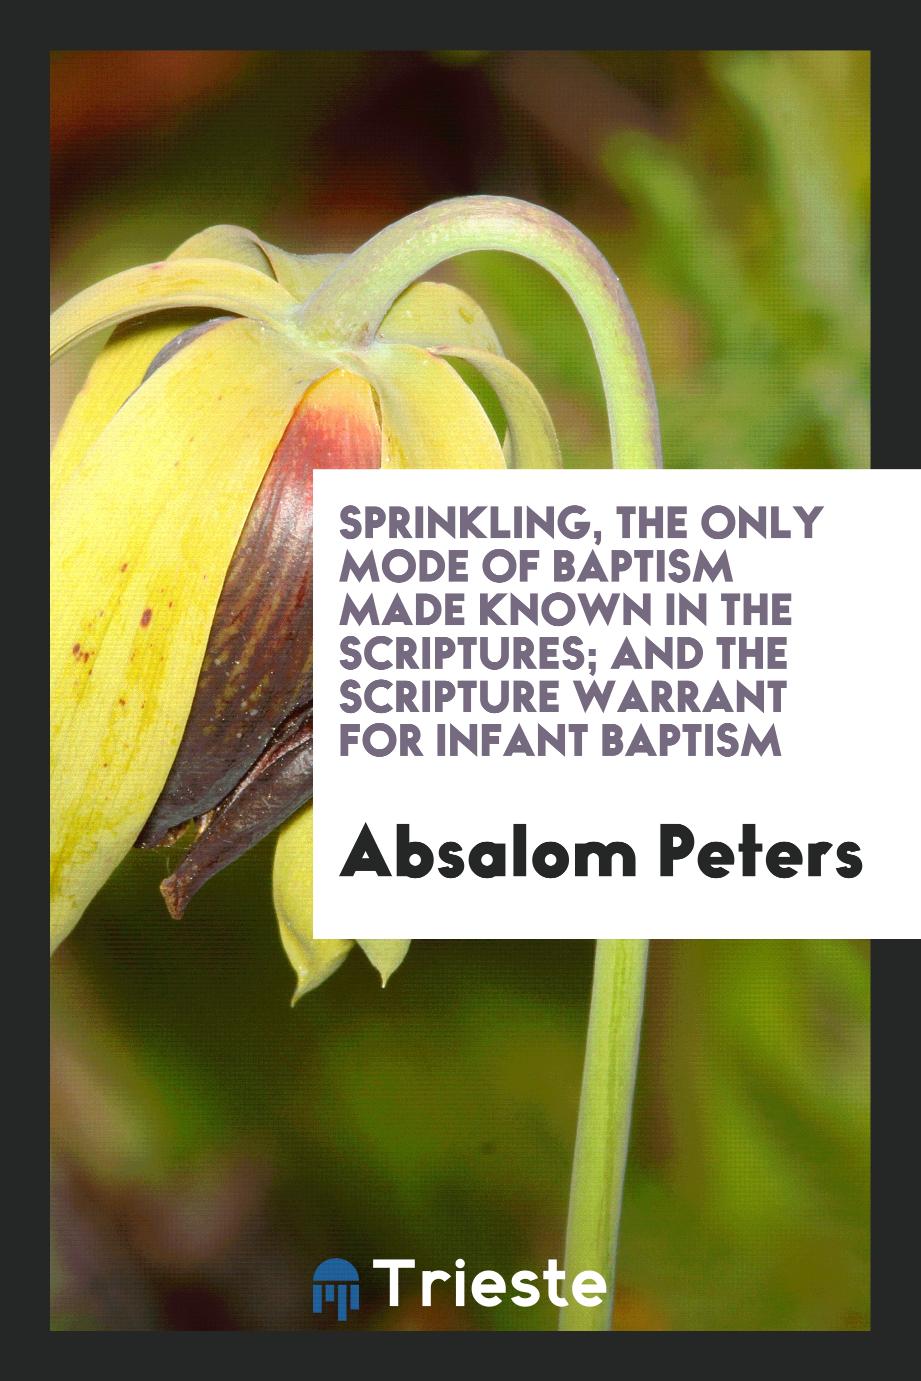 Sprinkling, the Only Mode of Baptism Made Known in the Scriptures; And the Scripture Warrant for Infant Baptism